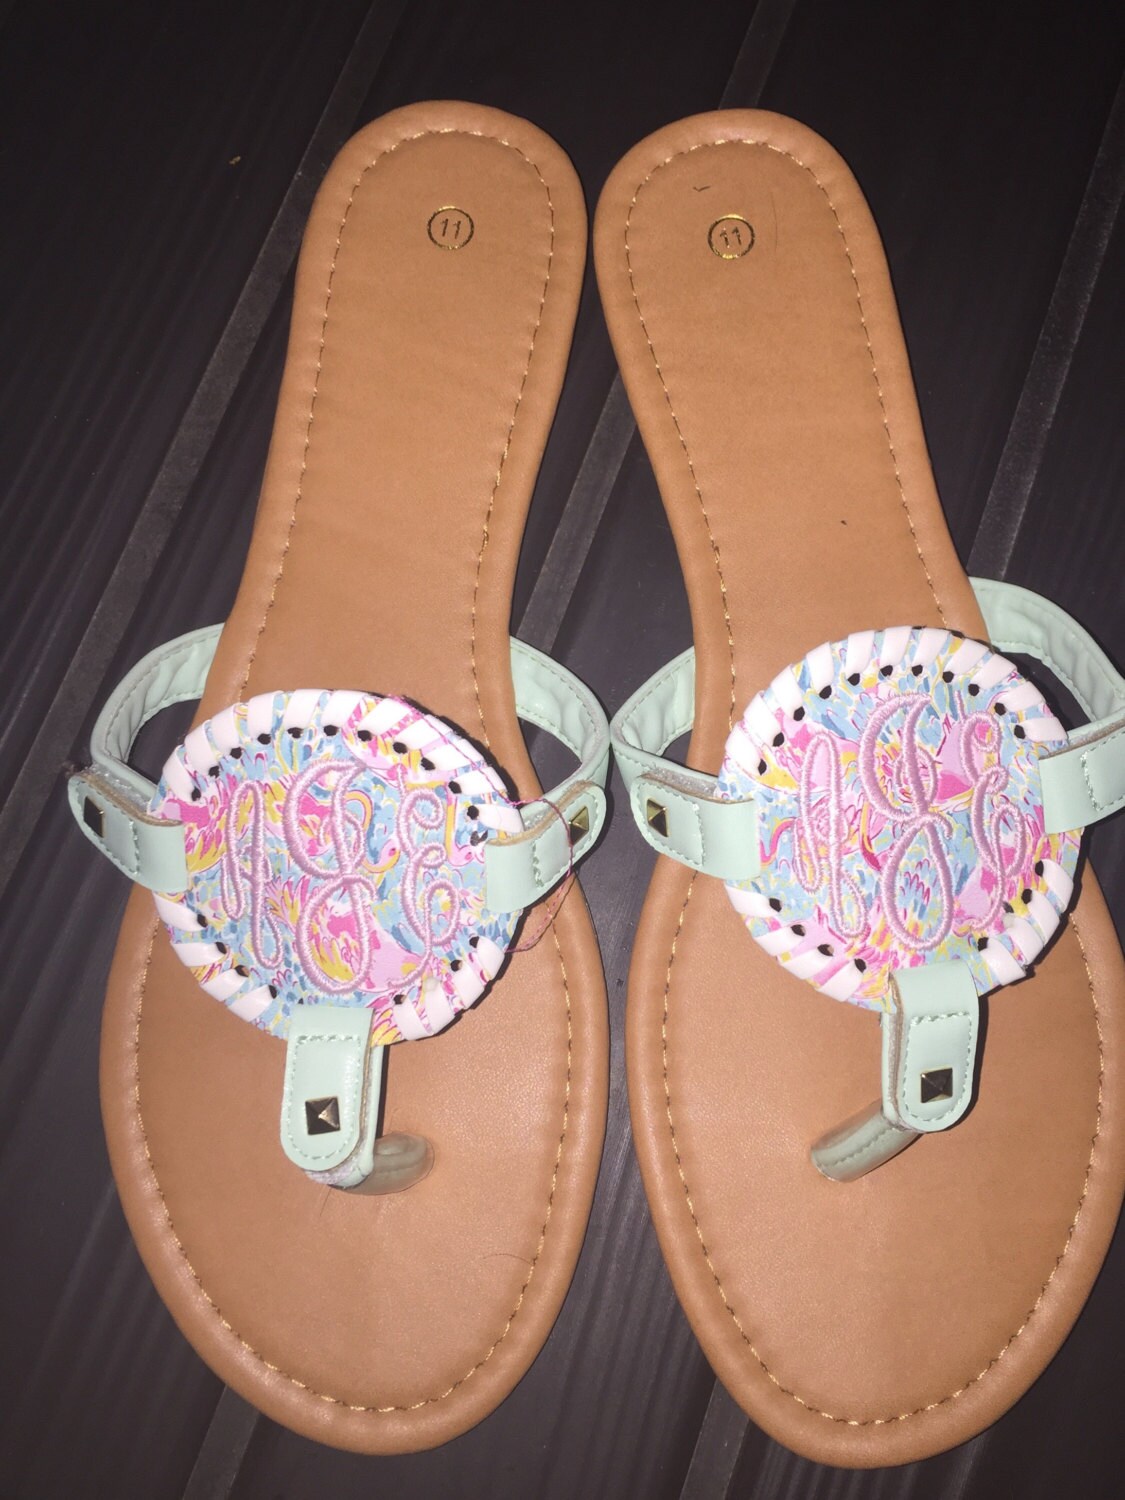 Monogram Sandals Lilly Inspired Monogrammed embroidered